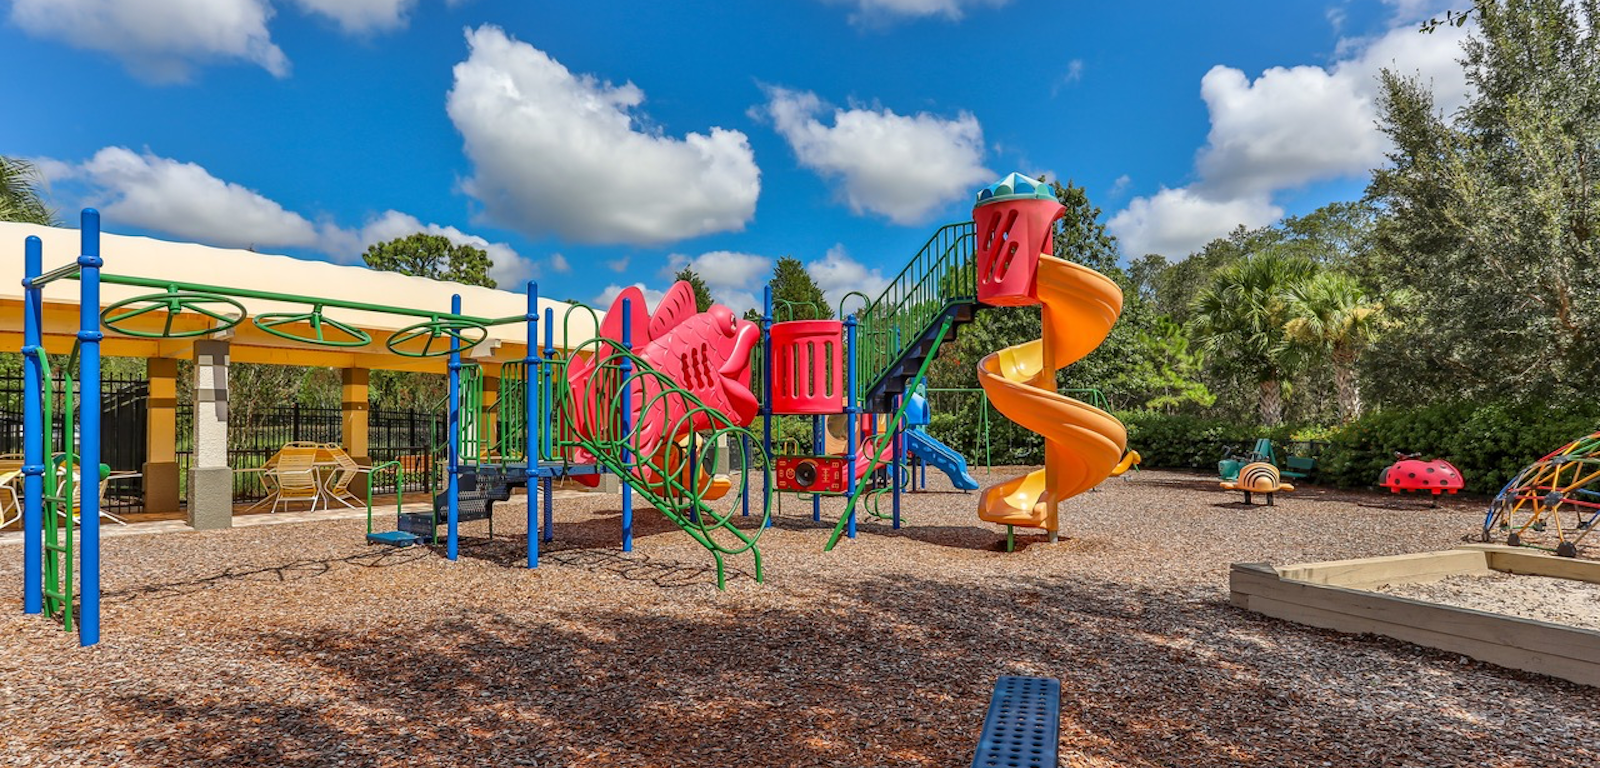 Sterling Hills - Playground with colorful slides